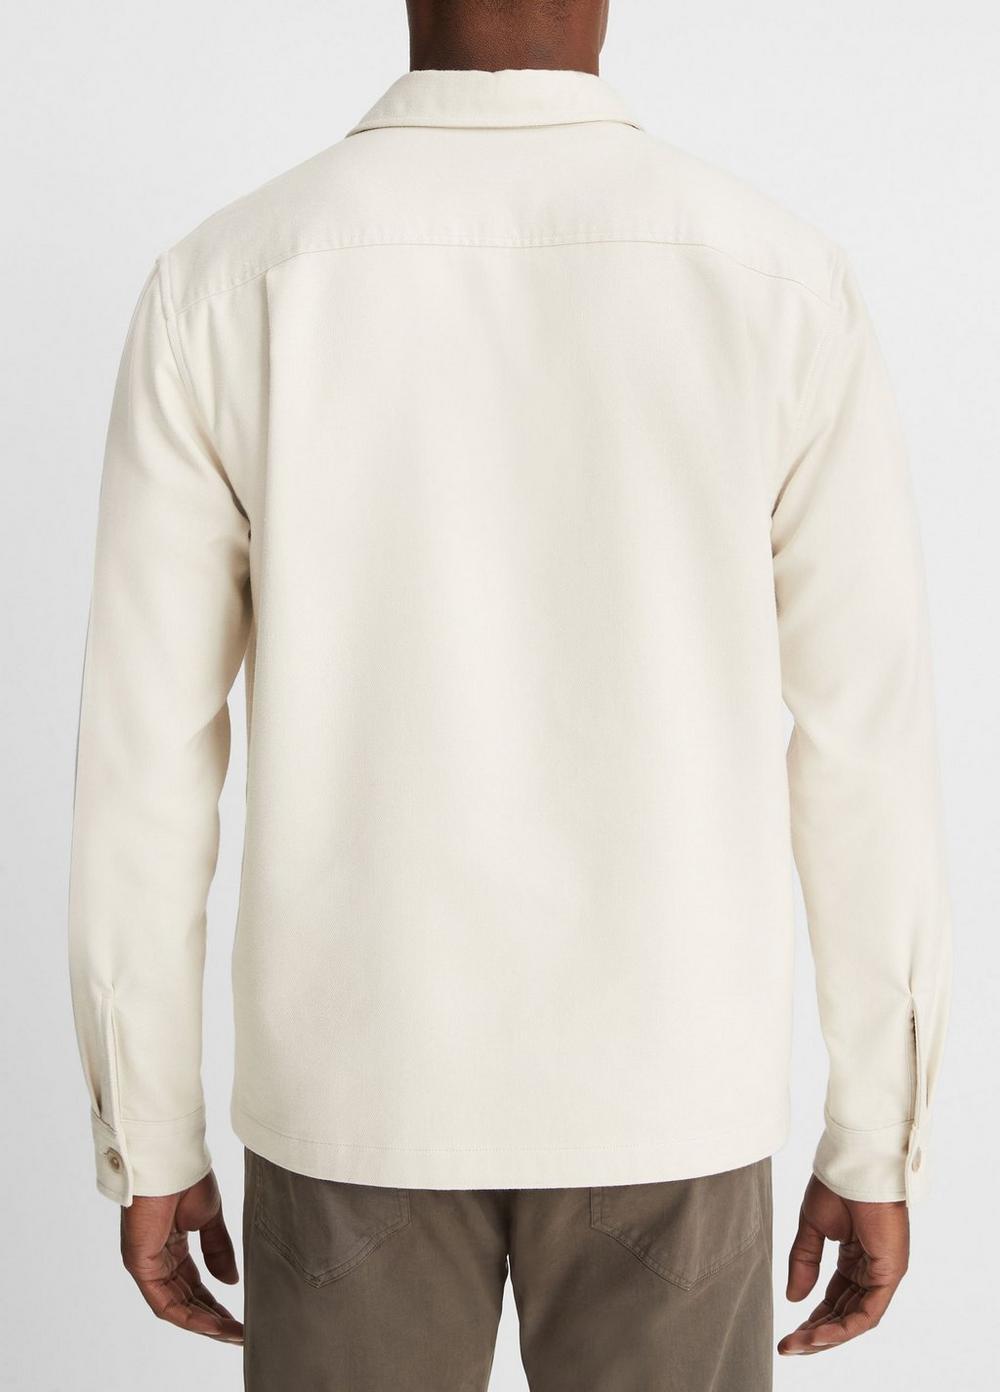 Double-Face Workwear Shirt in Long Sleeve | Vince